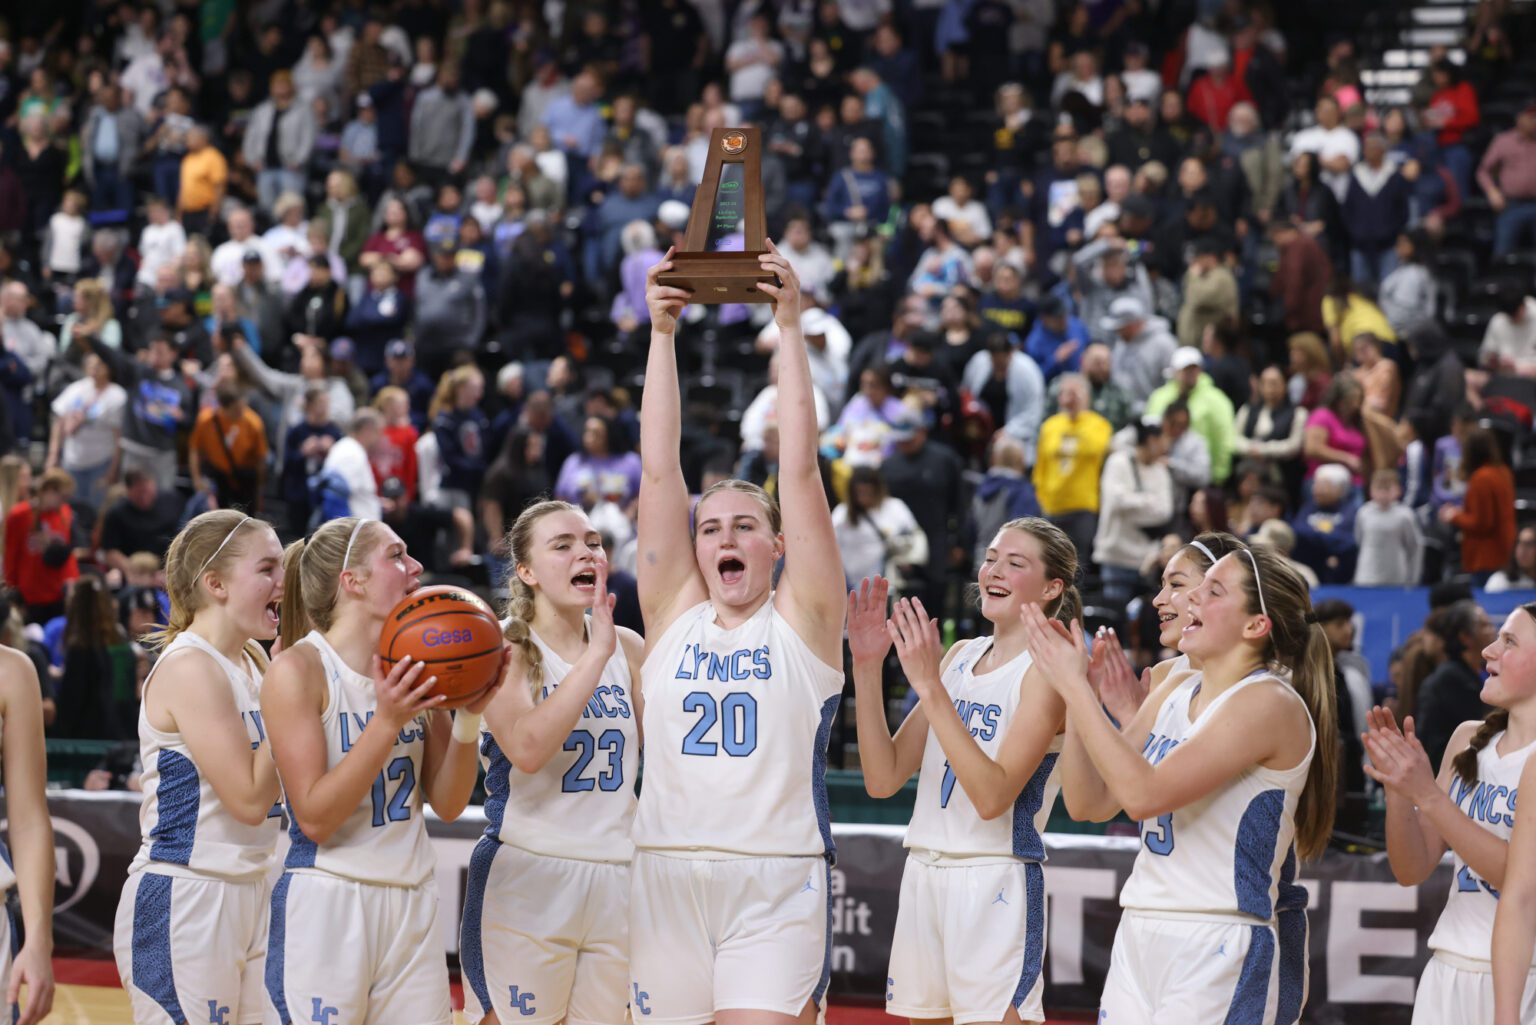 Lynden Christian’s Tabitha DeJong holds up the third-place trophy Saturday, March 2 after the Lyncs beat Wapato 72-64 in the 1A state tournament at the Yakima Valley SunDome.